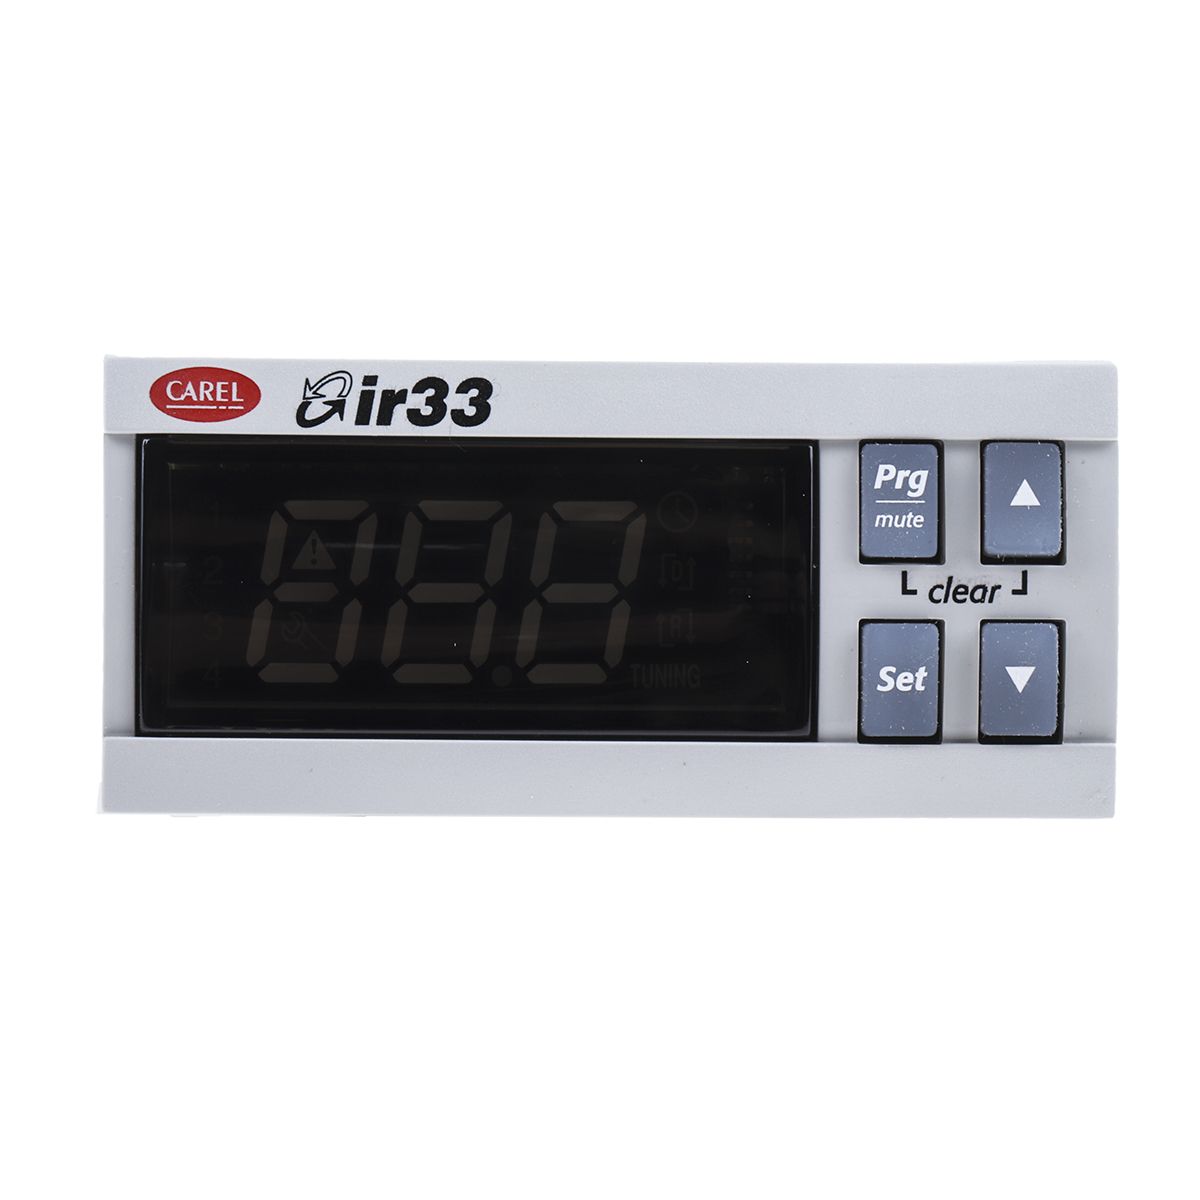 Carel IR33 Panel Mount PID Temperature Controller, 76.2 x 34.2mm, 1 Output Relay, 24 V ac/dc Supply Voltage